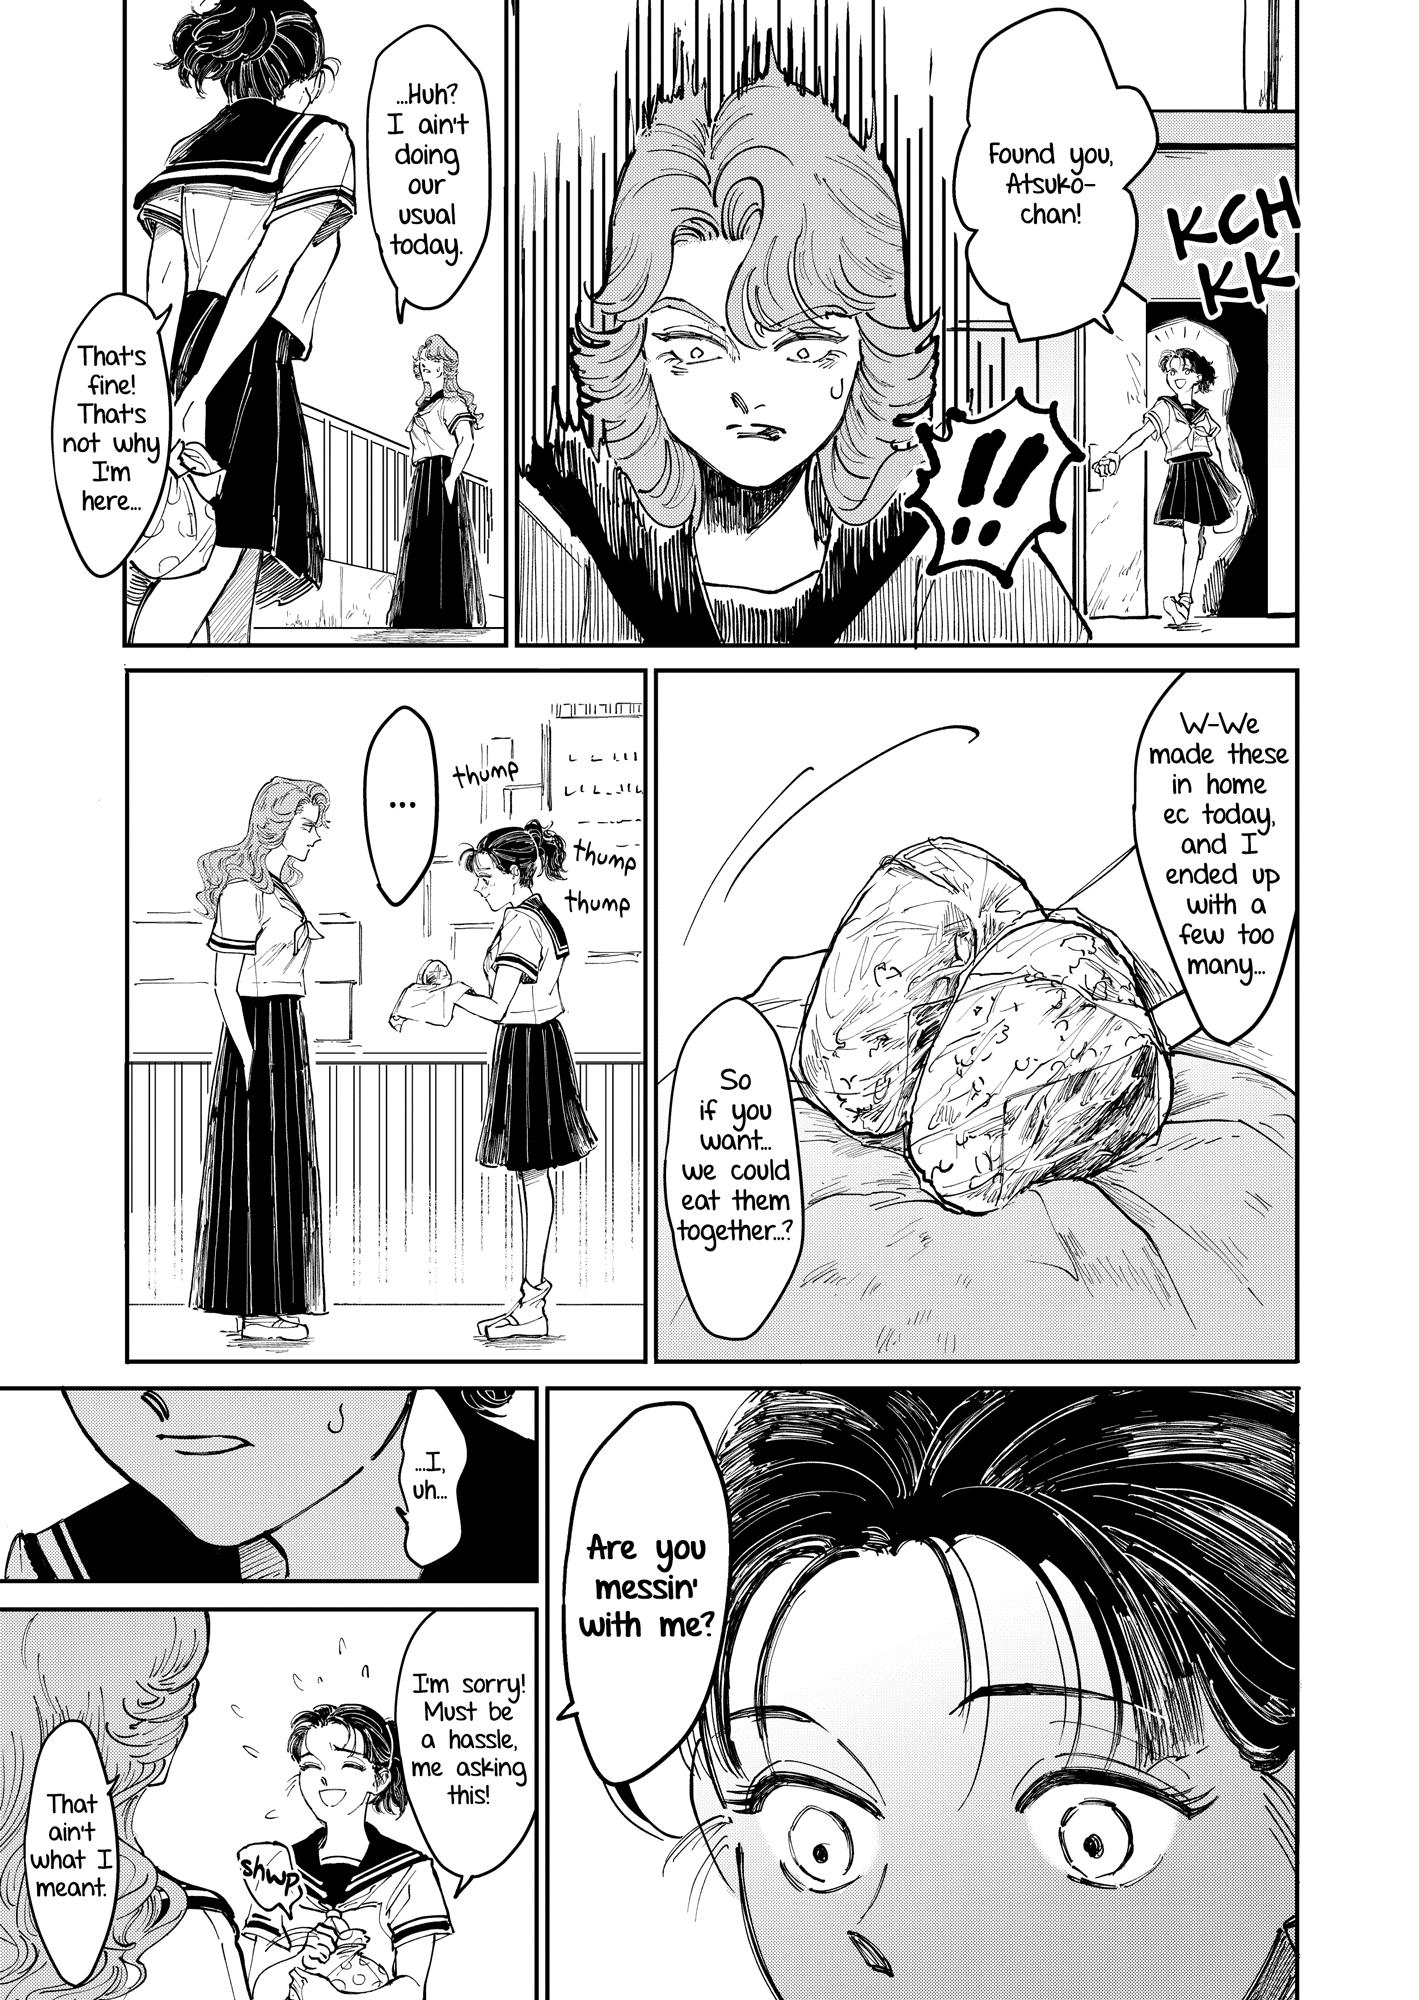 A Sukeban, A Transfer Student, And Their Silly Little Game - Page 2